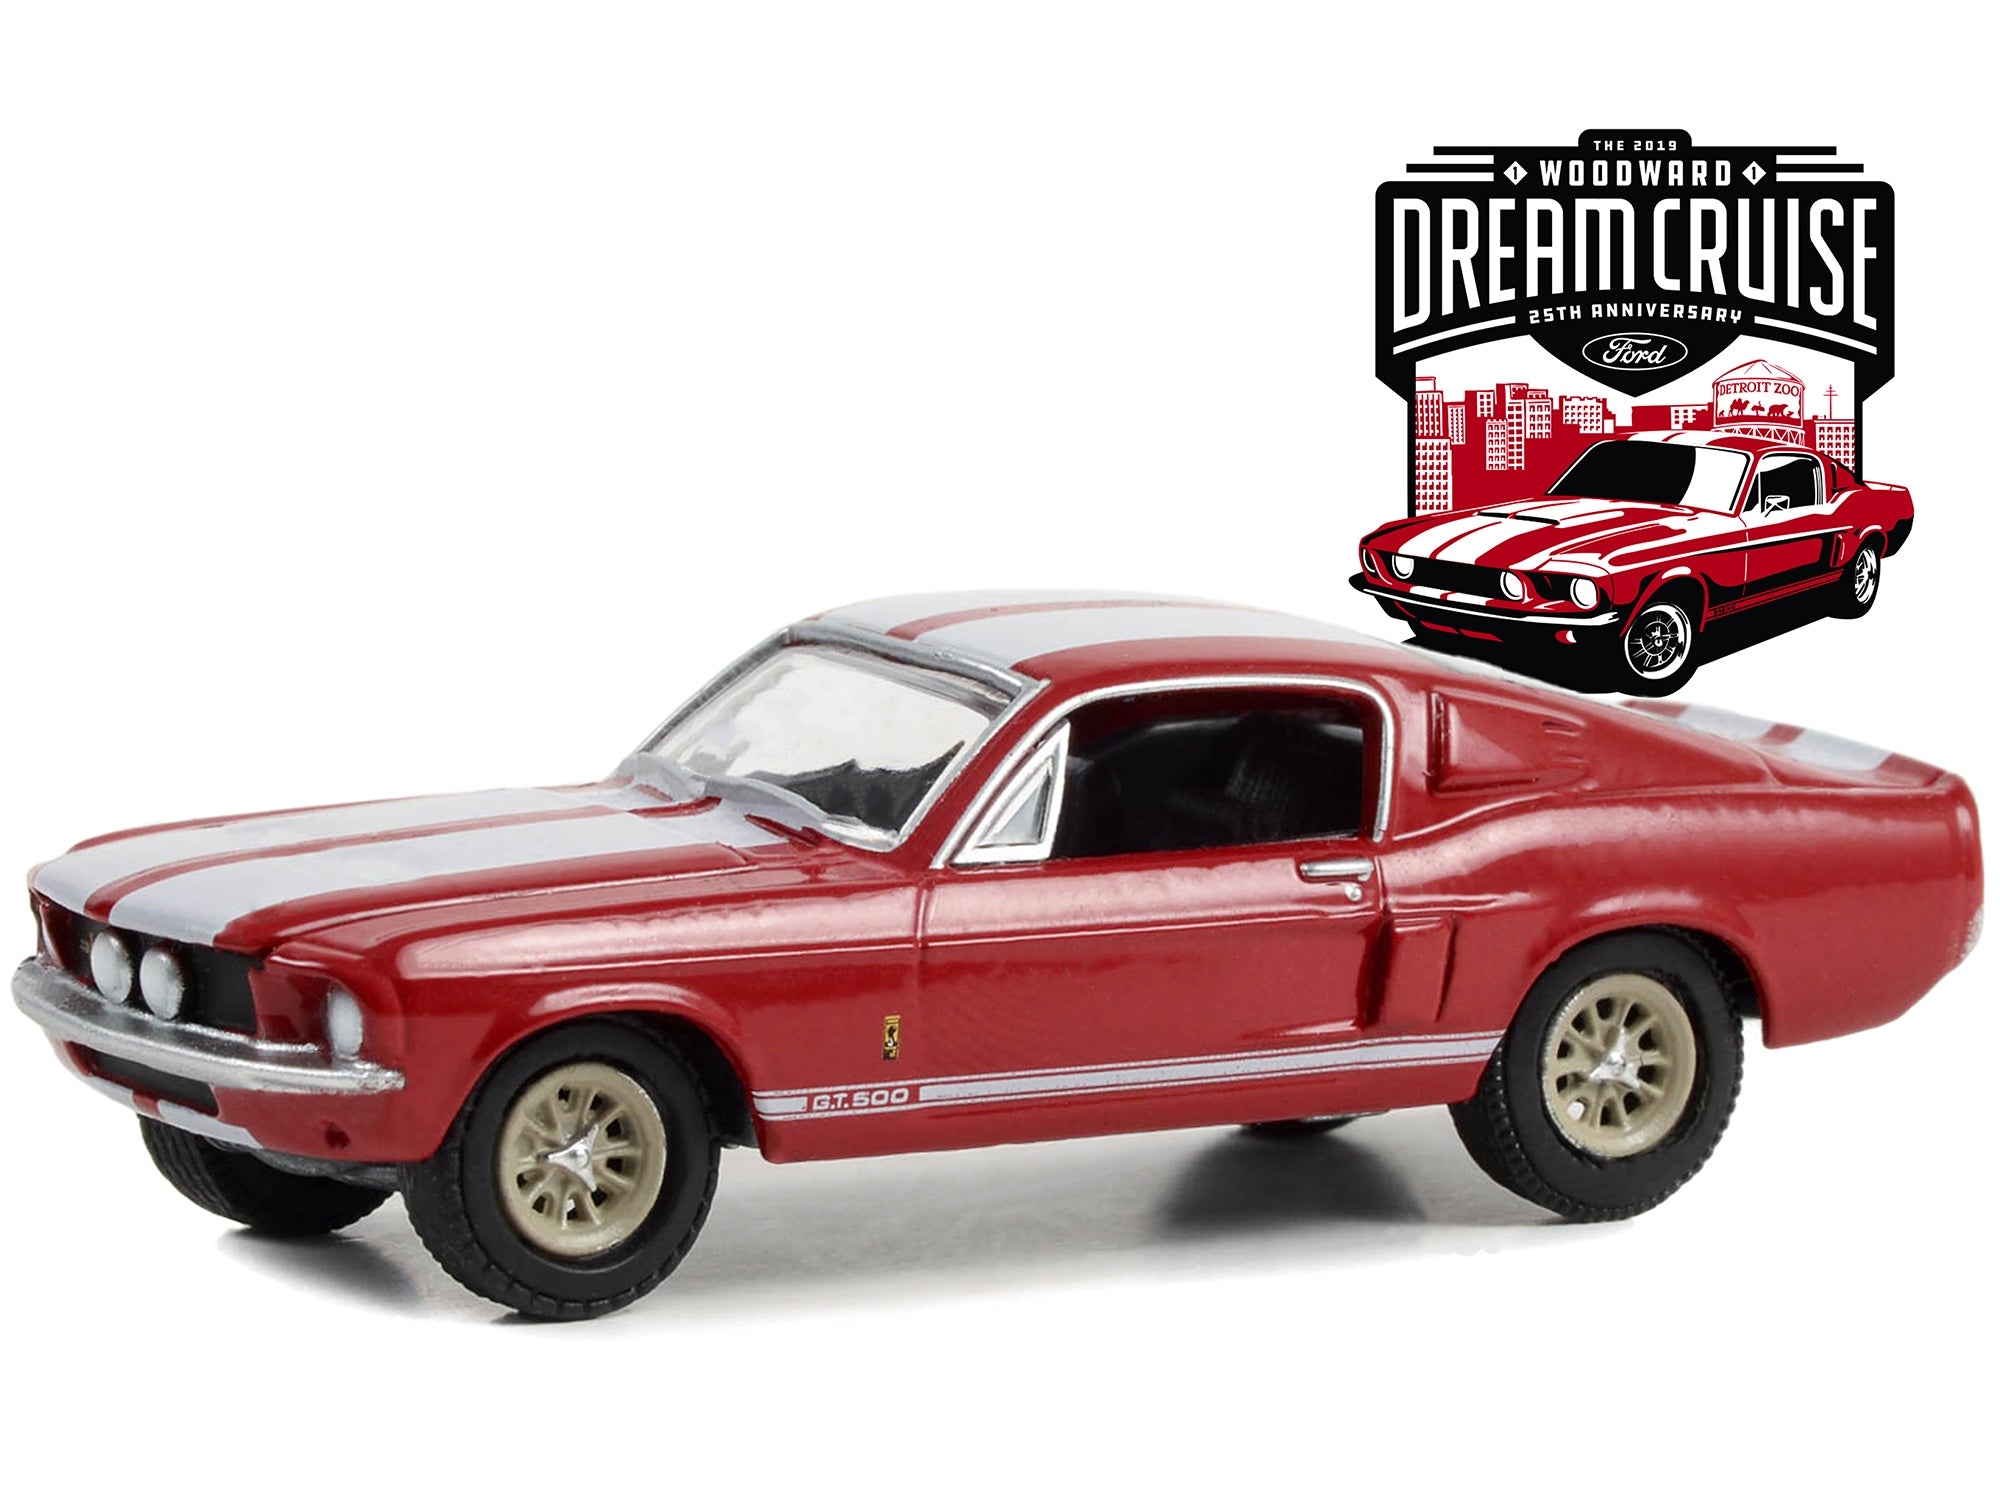 1967 Shelby GT-500 Red with White Stripes "25th Annual Woodward Dream Cruise Featured Heritage Vehicle" (2019) "Woodward Dream Cruise" Series 1 1/64 Diecast Model Car by Greenlight